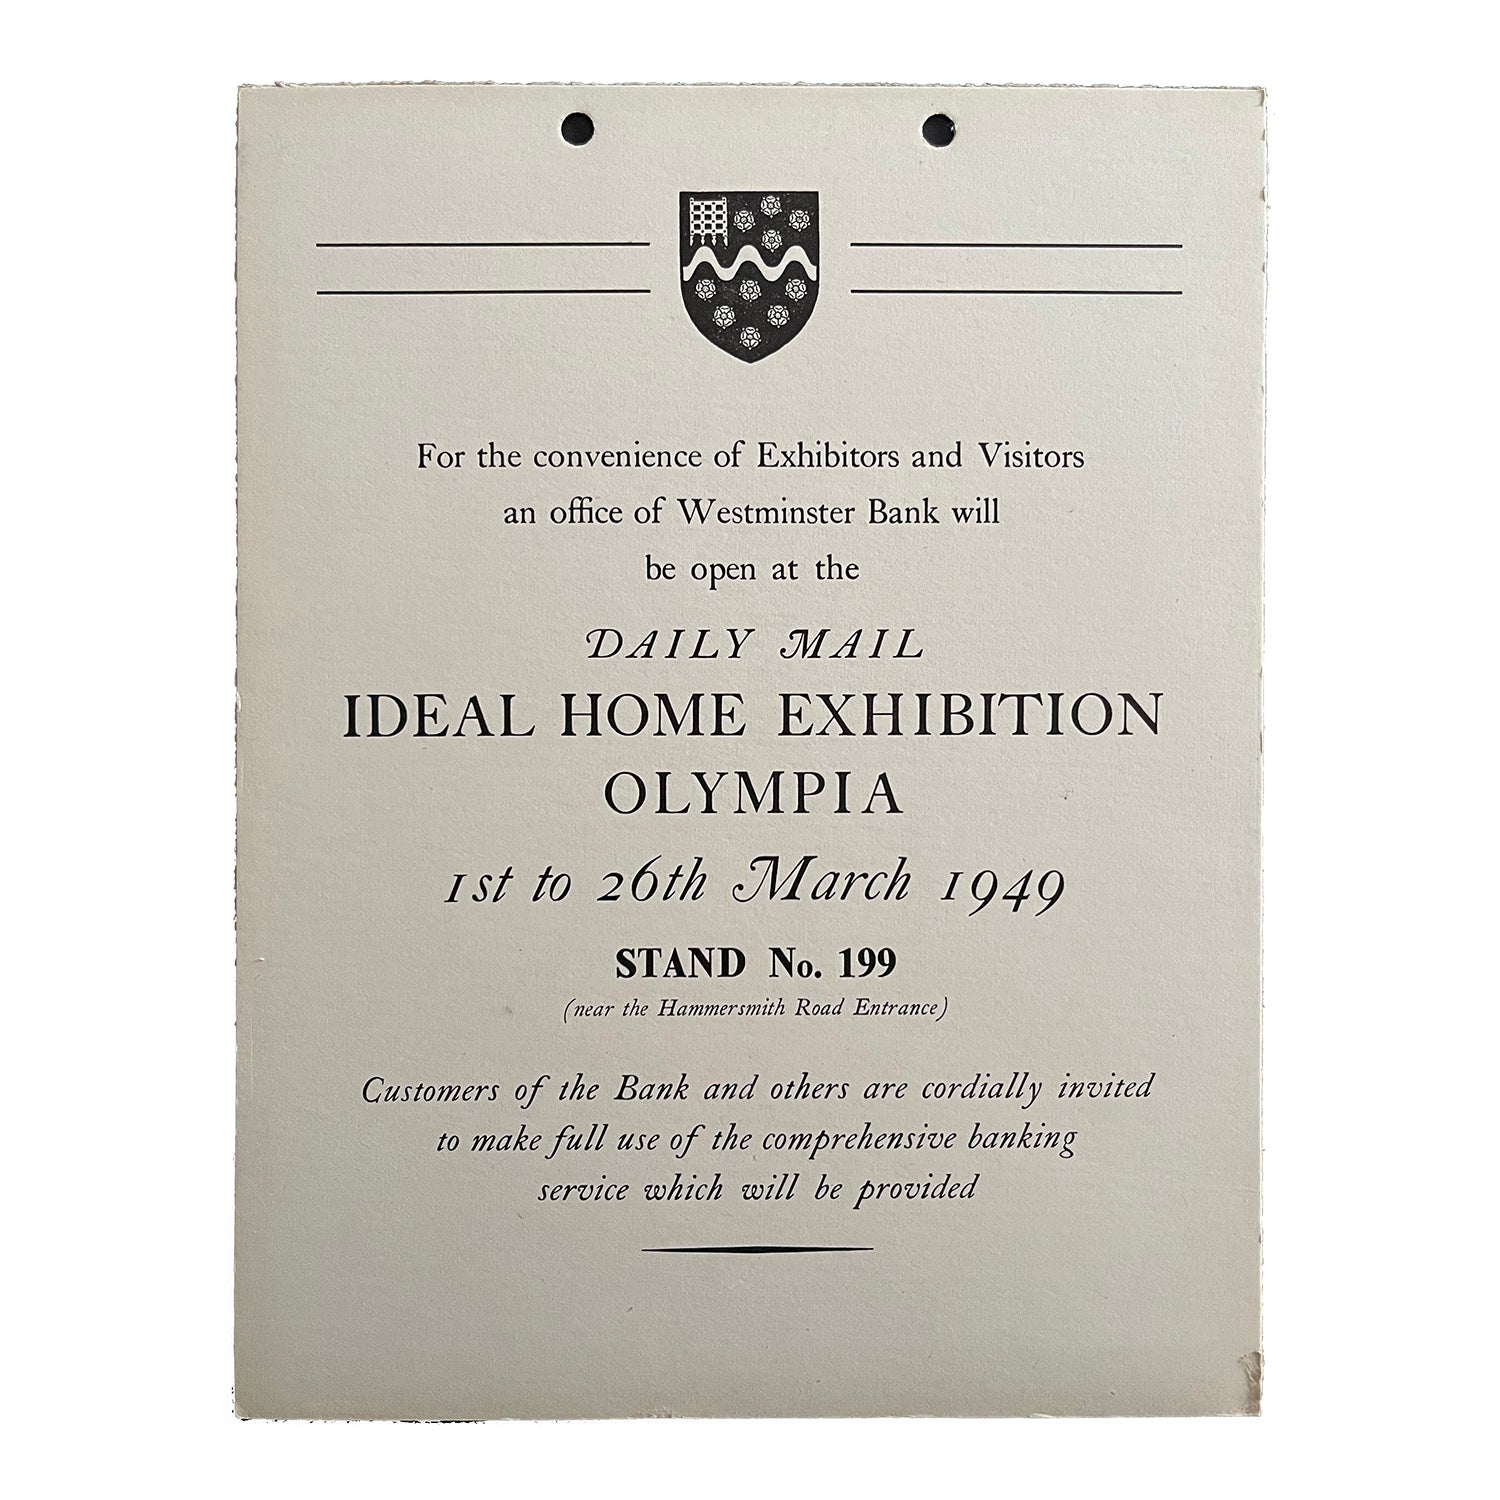 hanging card exhibitor notice published by the Westminster Bank for display at the Daily Mail Ideal Homes Exhibition Olympia, 1949